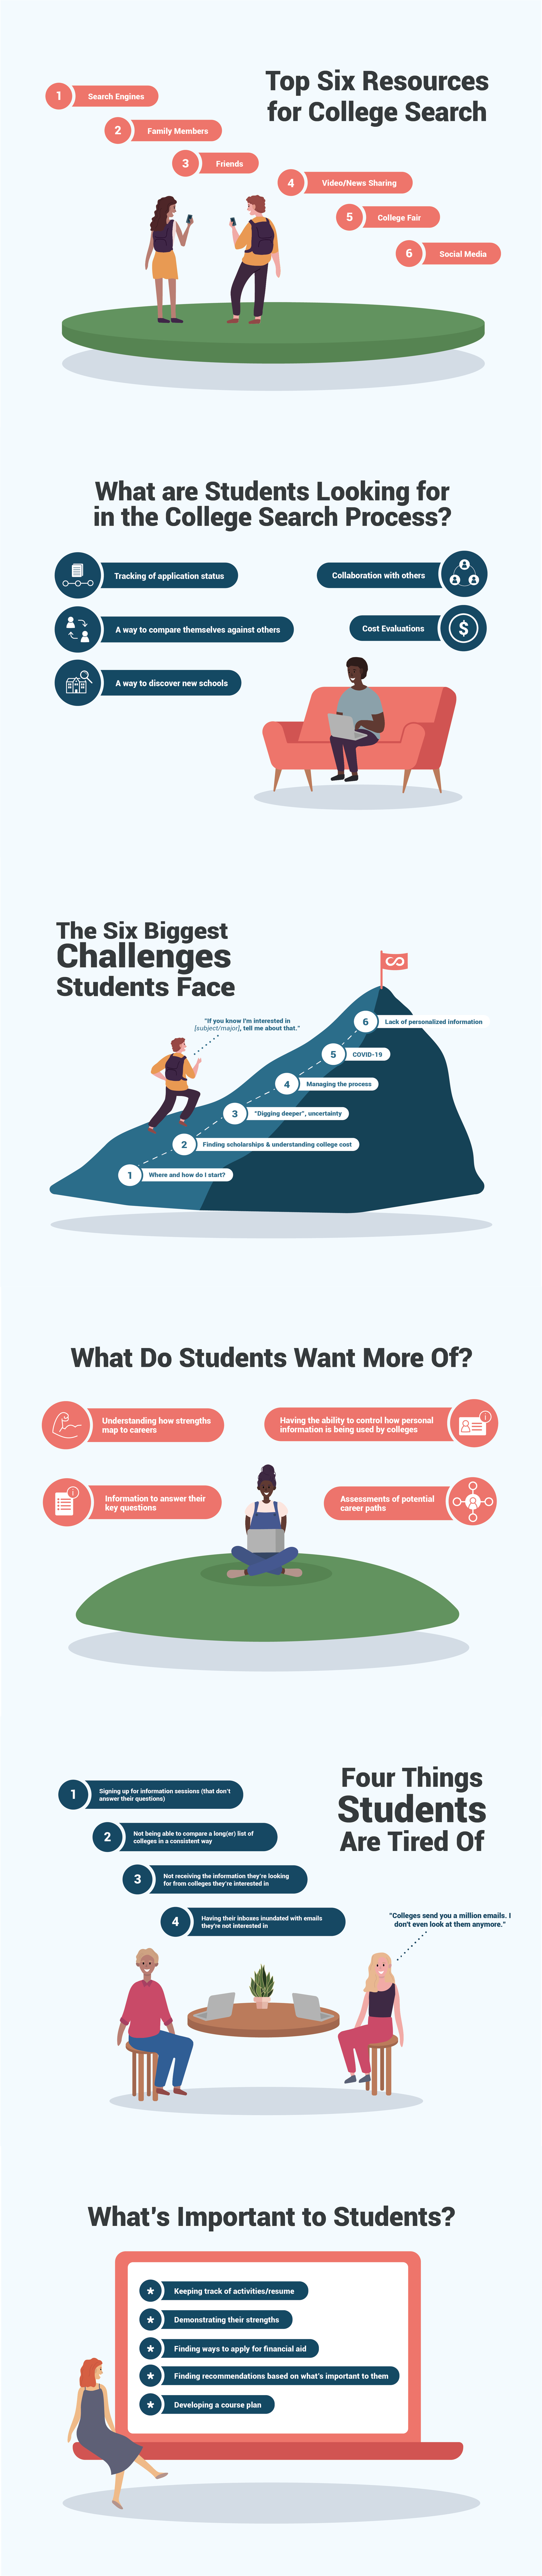 student_infographic_v2_graphics only